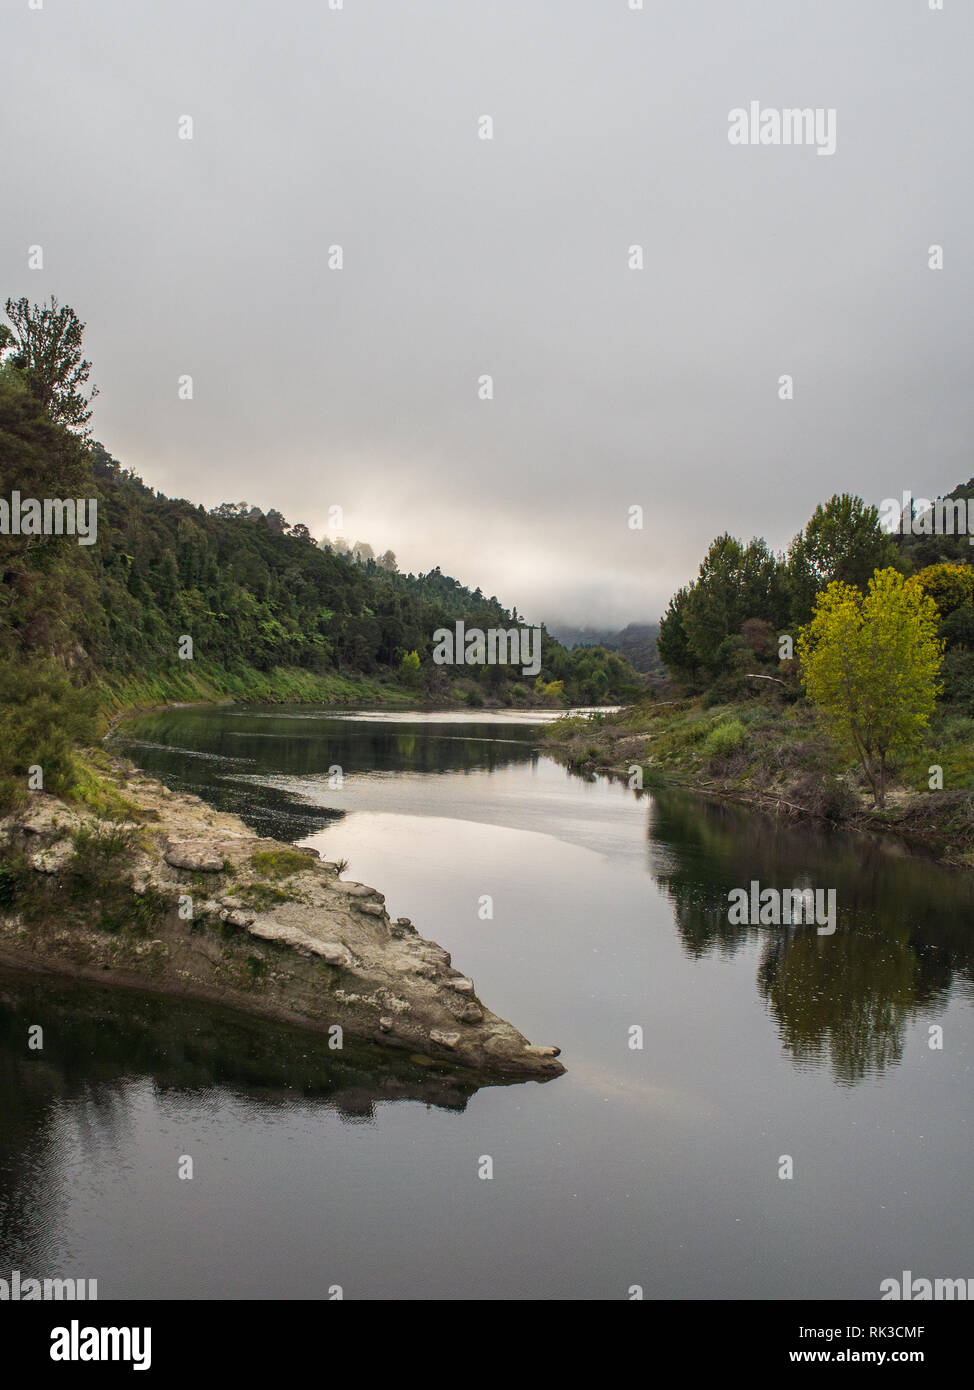 Confluence of Ahuahu Stream with Whanganui River, native forest bush clad hills, calm still autumn morning, Te Tuhi Landing, North Island, New Zealand Stock Photo